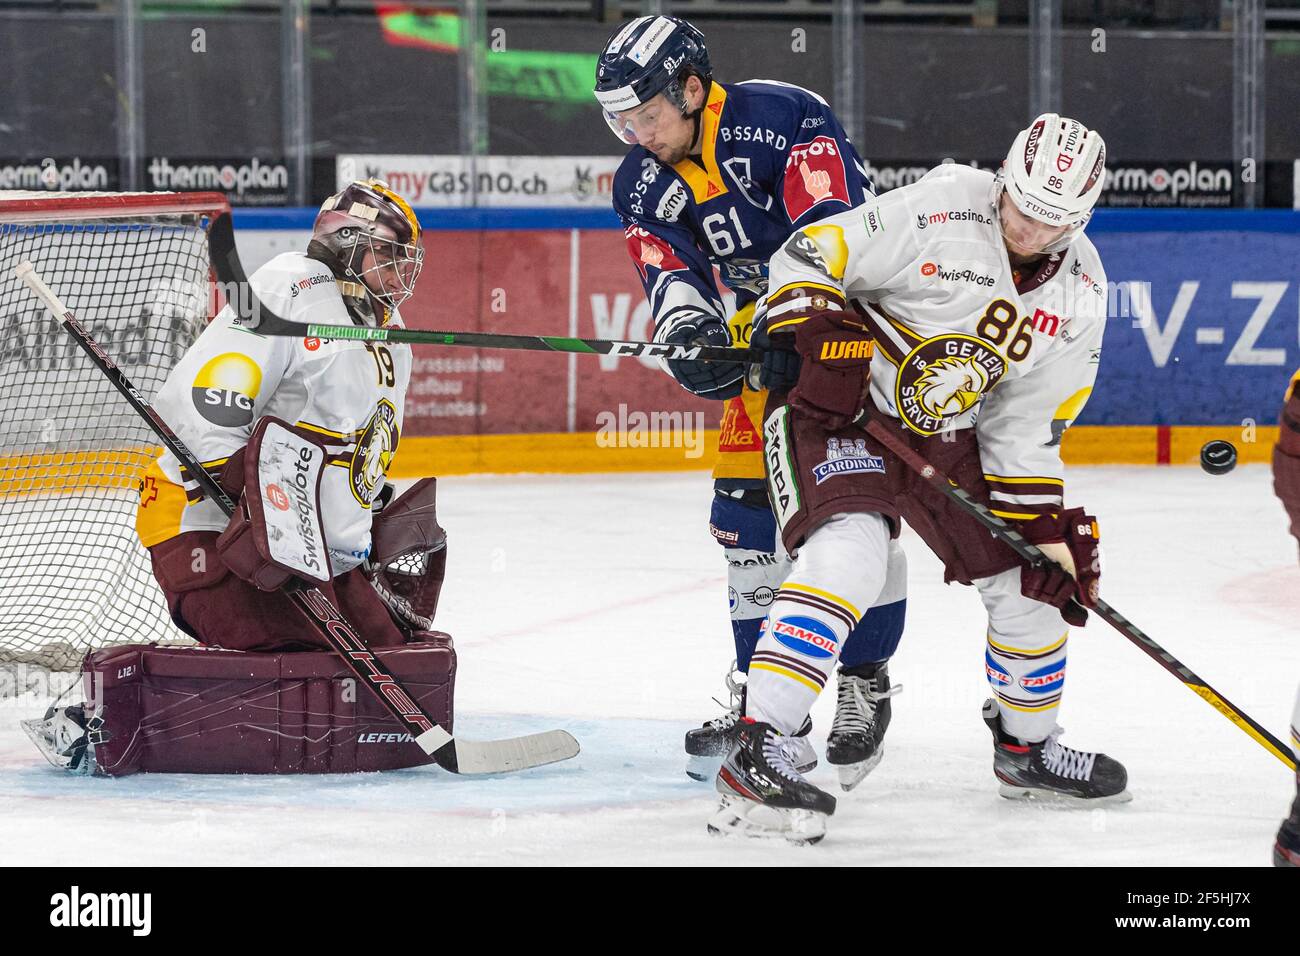 # 86 Joel Vermin (Geneva) with Sven Leuenberger # 61 (EV Zug) fighting for the disc during the National League Regular Season ice hockey game between EV Zug and Geneve-Servette HC on March 24th, 2021 in the Bossard Arena in Zug. (Switzerland/Croatia OUT) Credit: SPP Sport Press Photo. /Alamy Live News Stock Photo